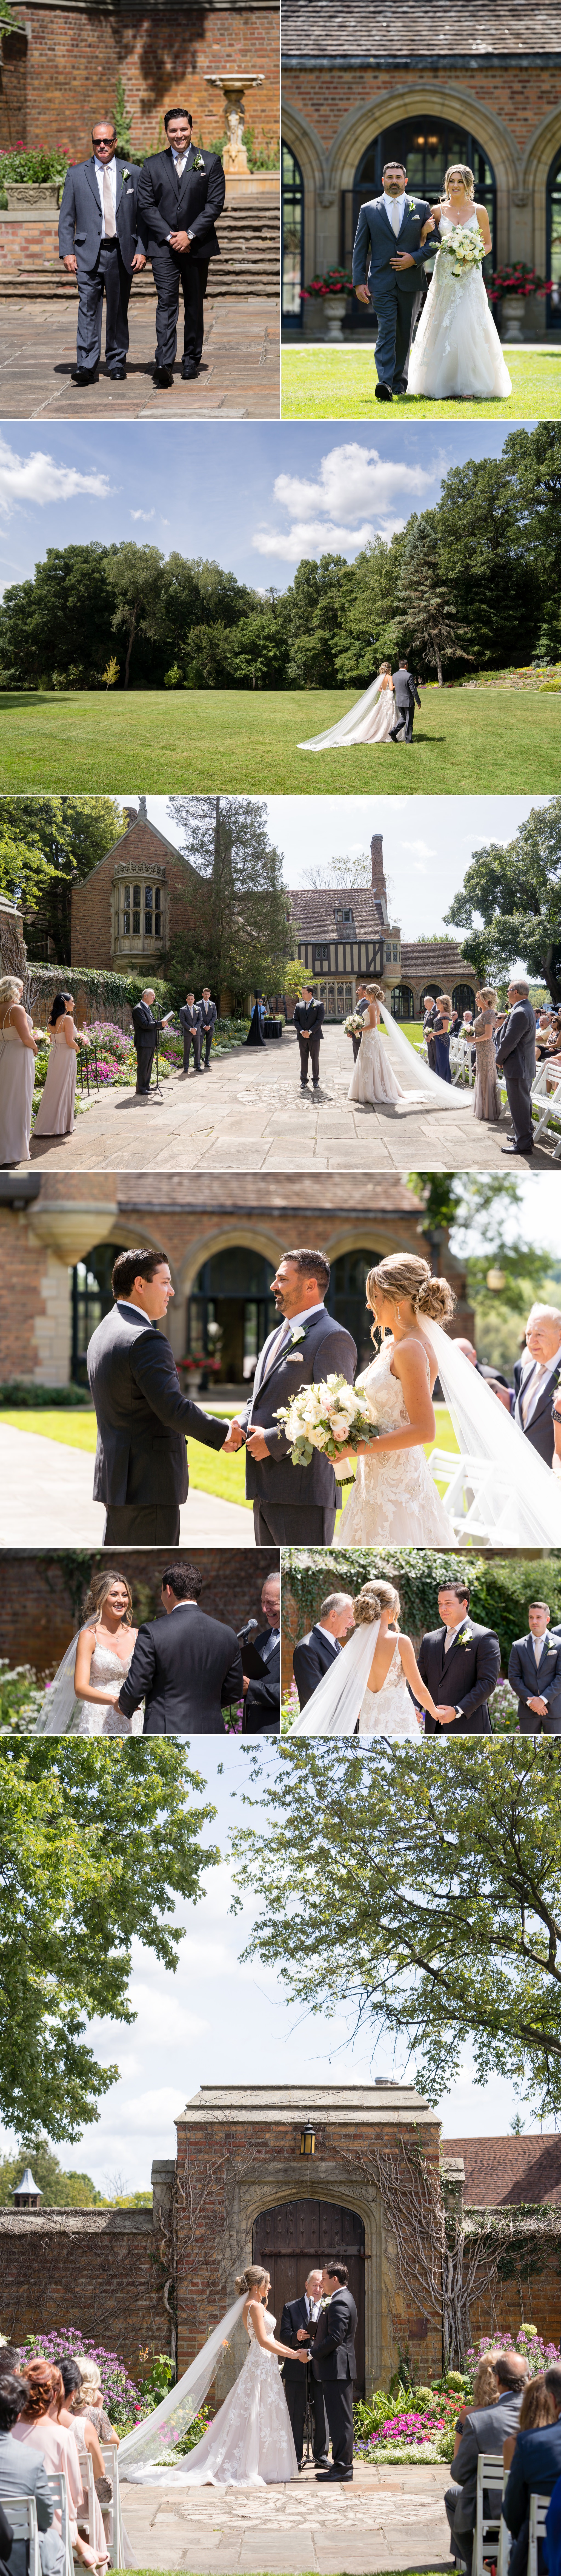 Meadowbrook Hall Wedding with Ken and Taylor - Brian Weitzel